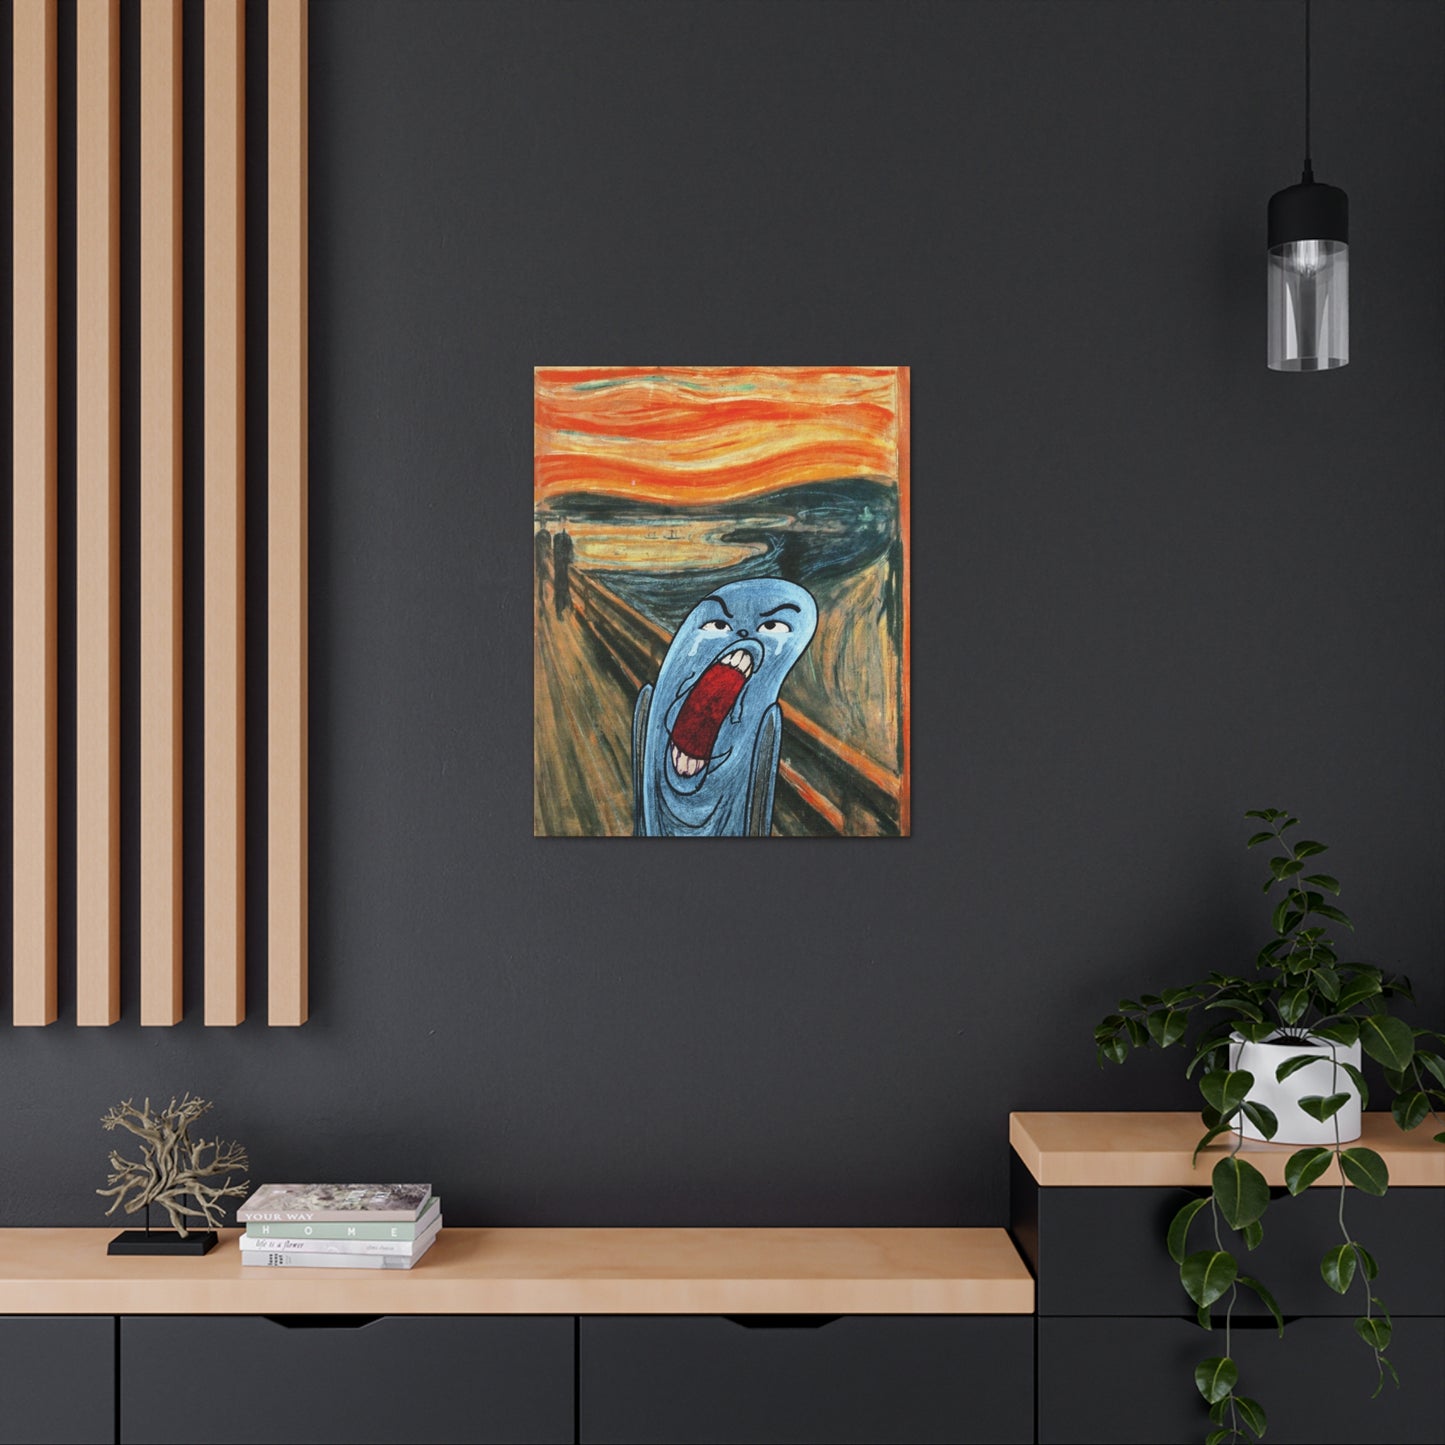 The Ugly Smell Scream canvas print